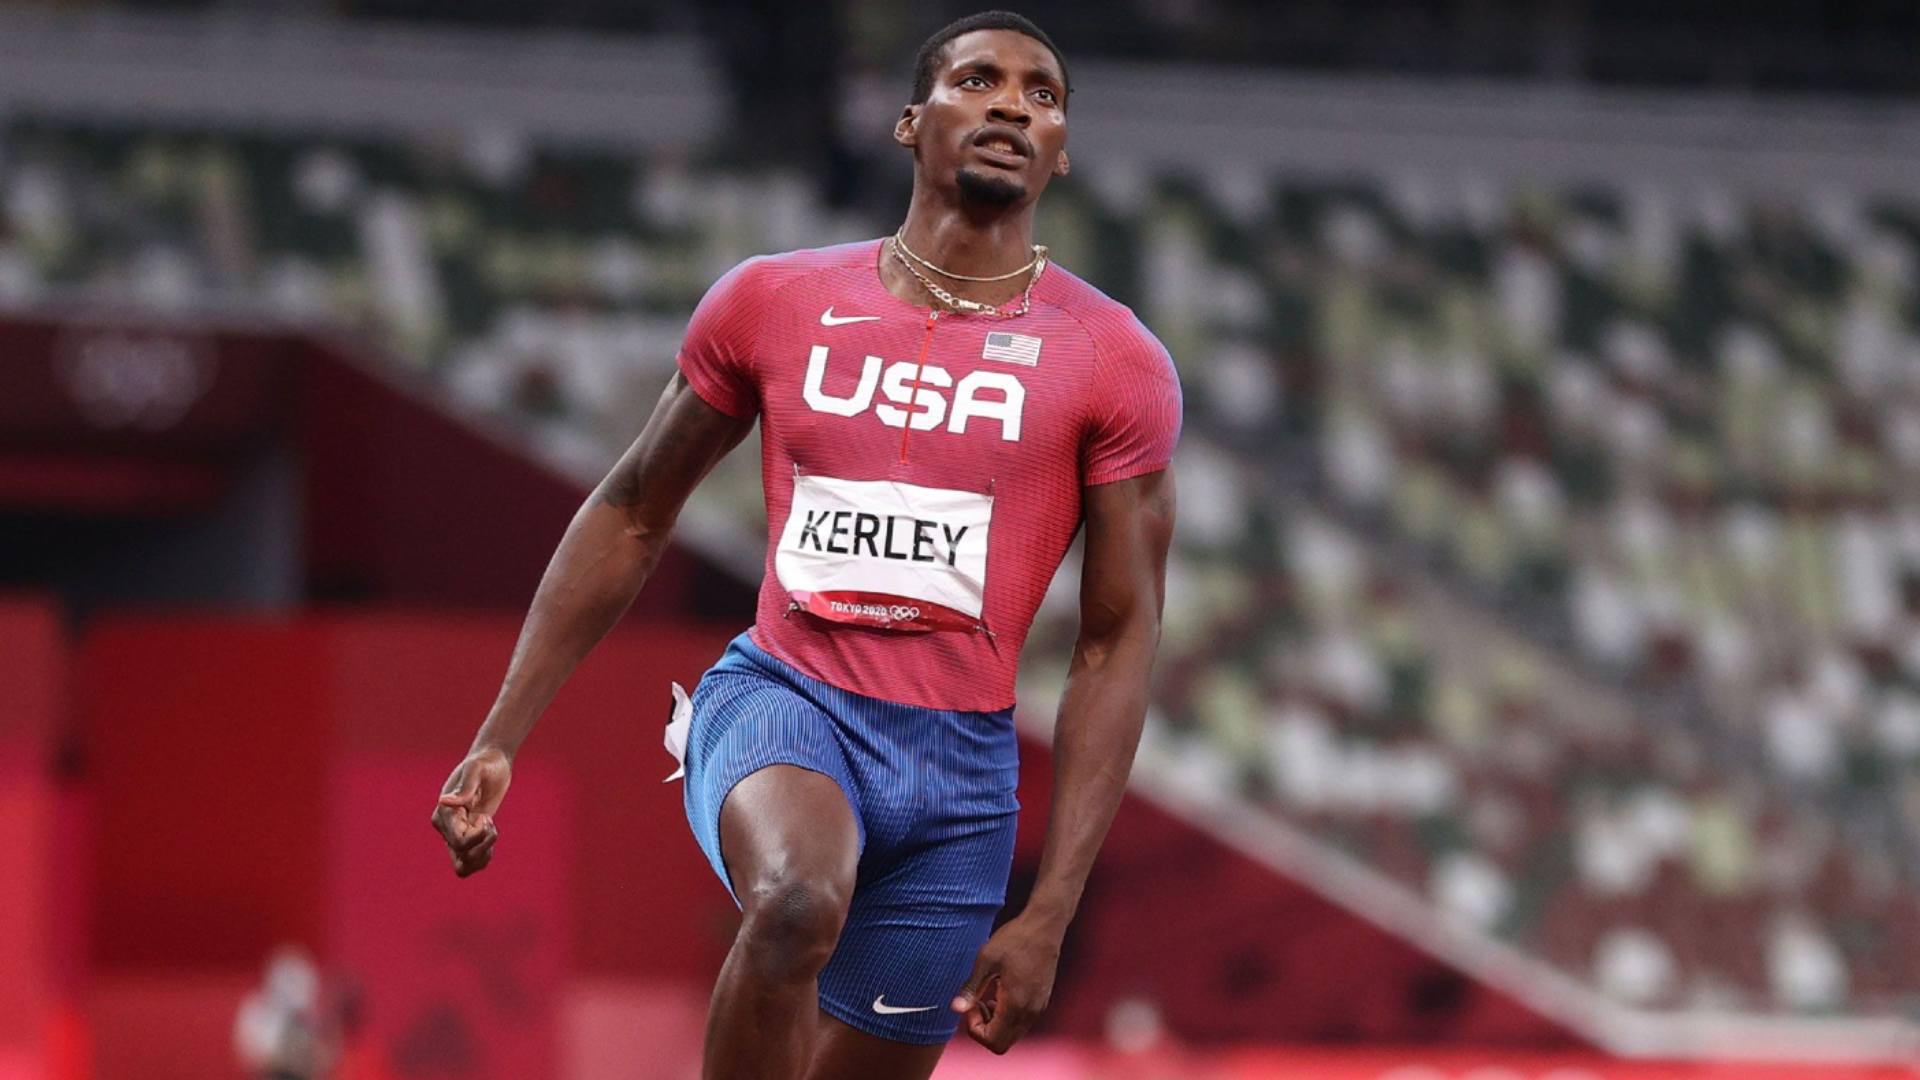 Fred Kerley in action during Tokyo Olympics 2020 (Image Credits - World athletics)